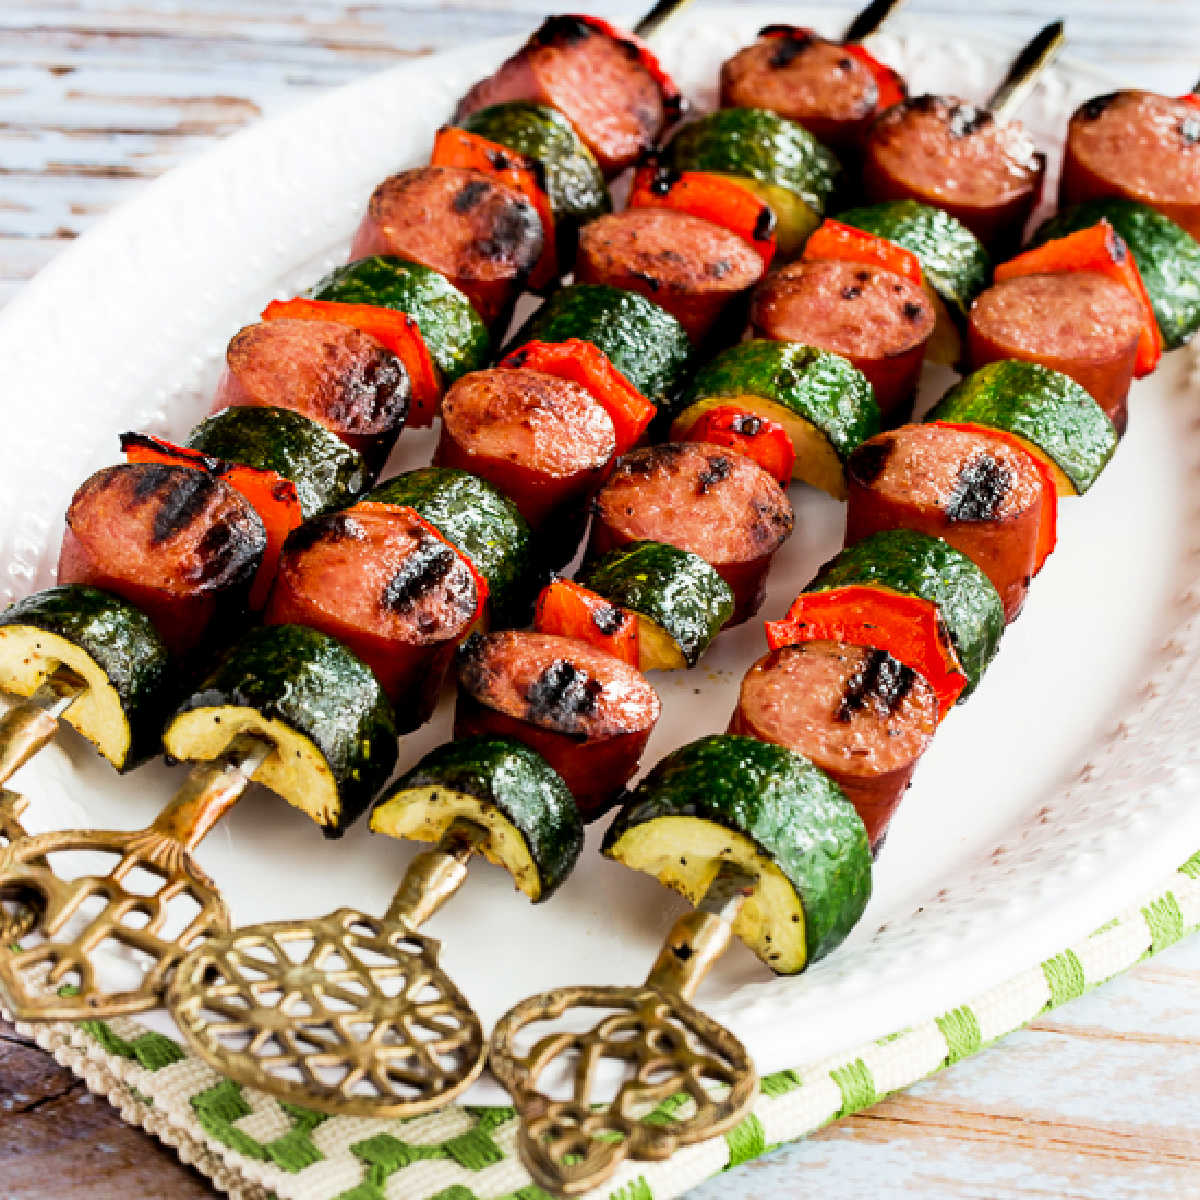 Easy Kabobs with Zucchini and Sausage shown on skewers on serving plate.